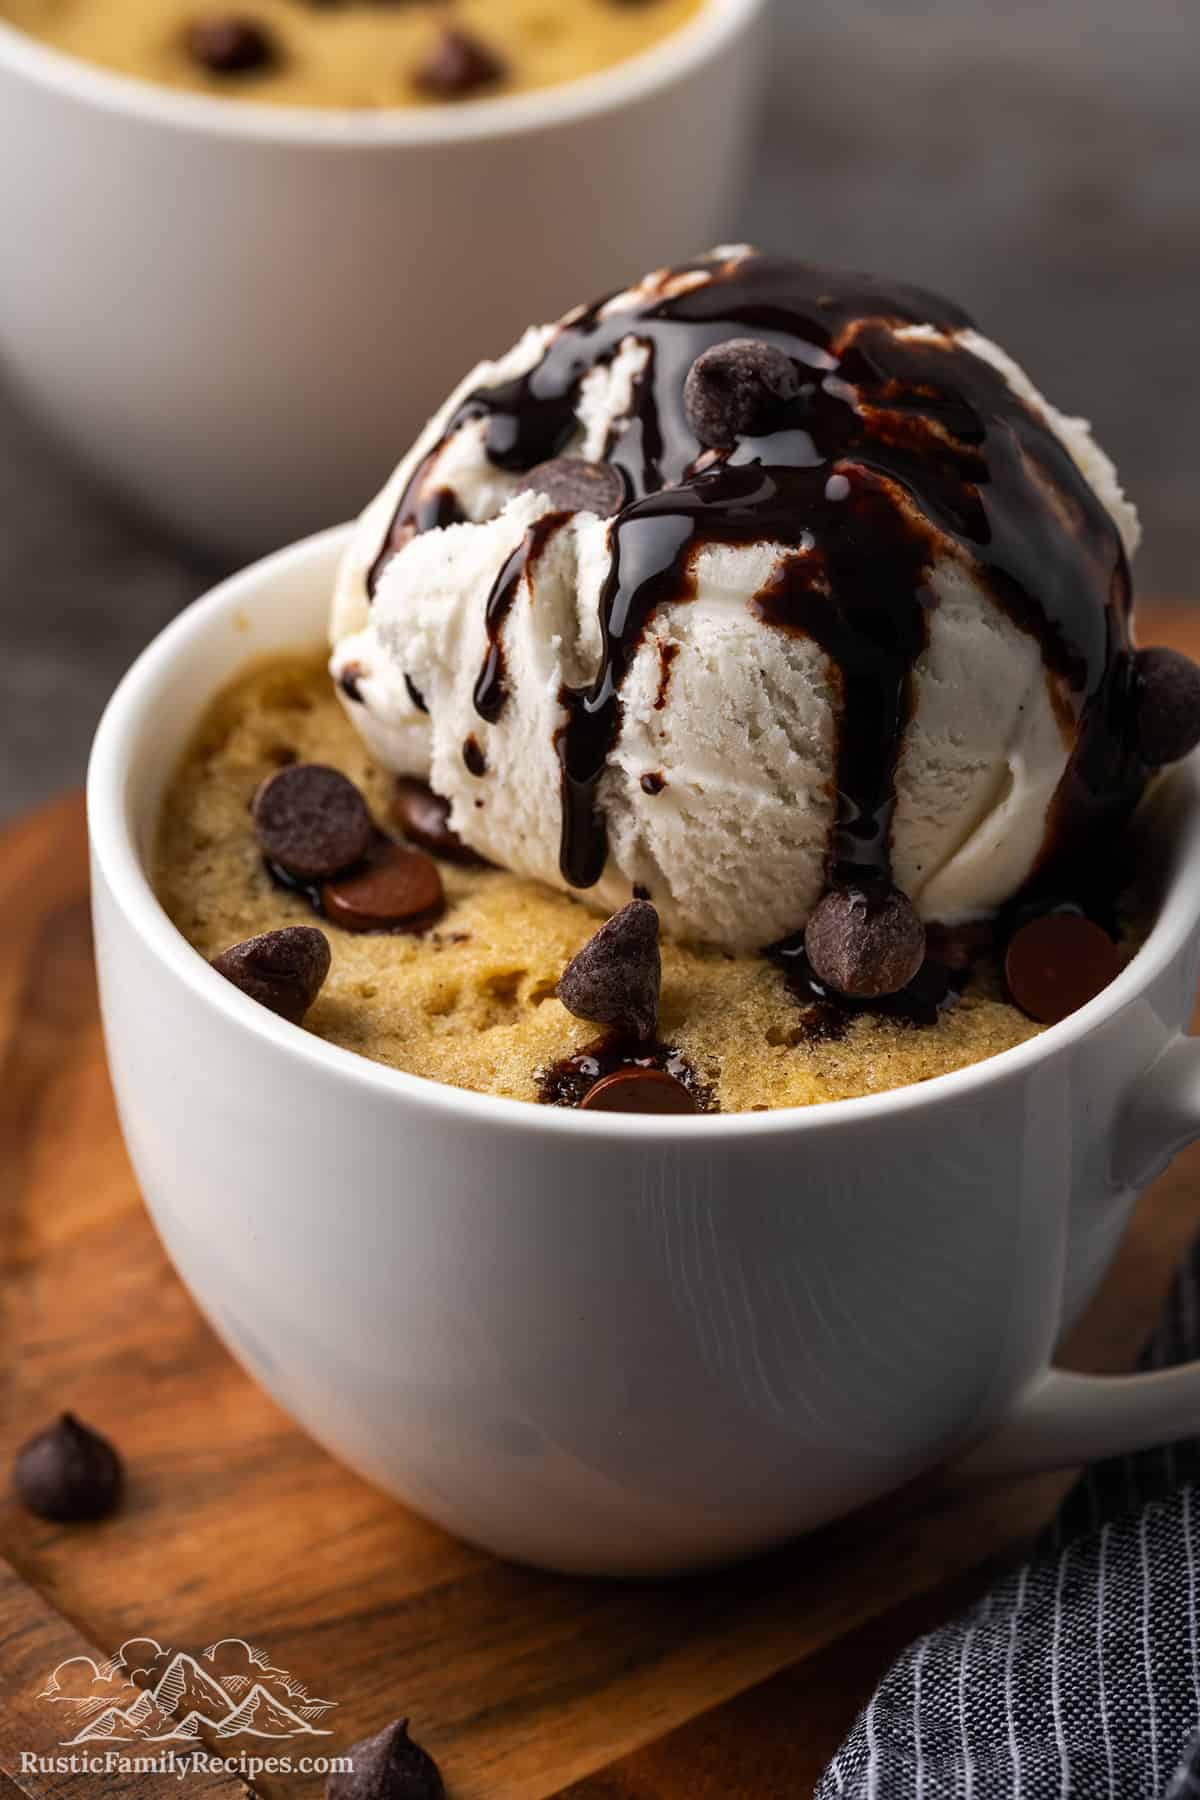 Chocolate Chip Cookie in a Mug served with ice cream and chocolate syrup.